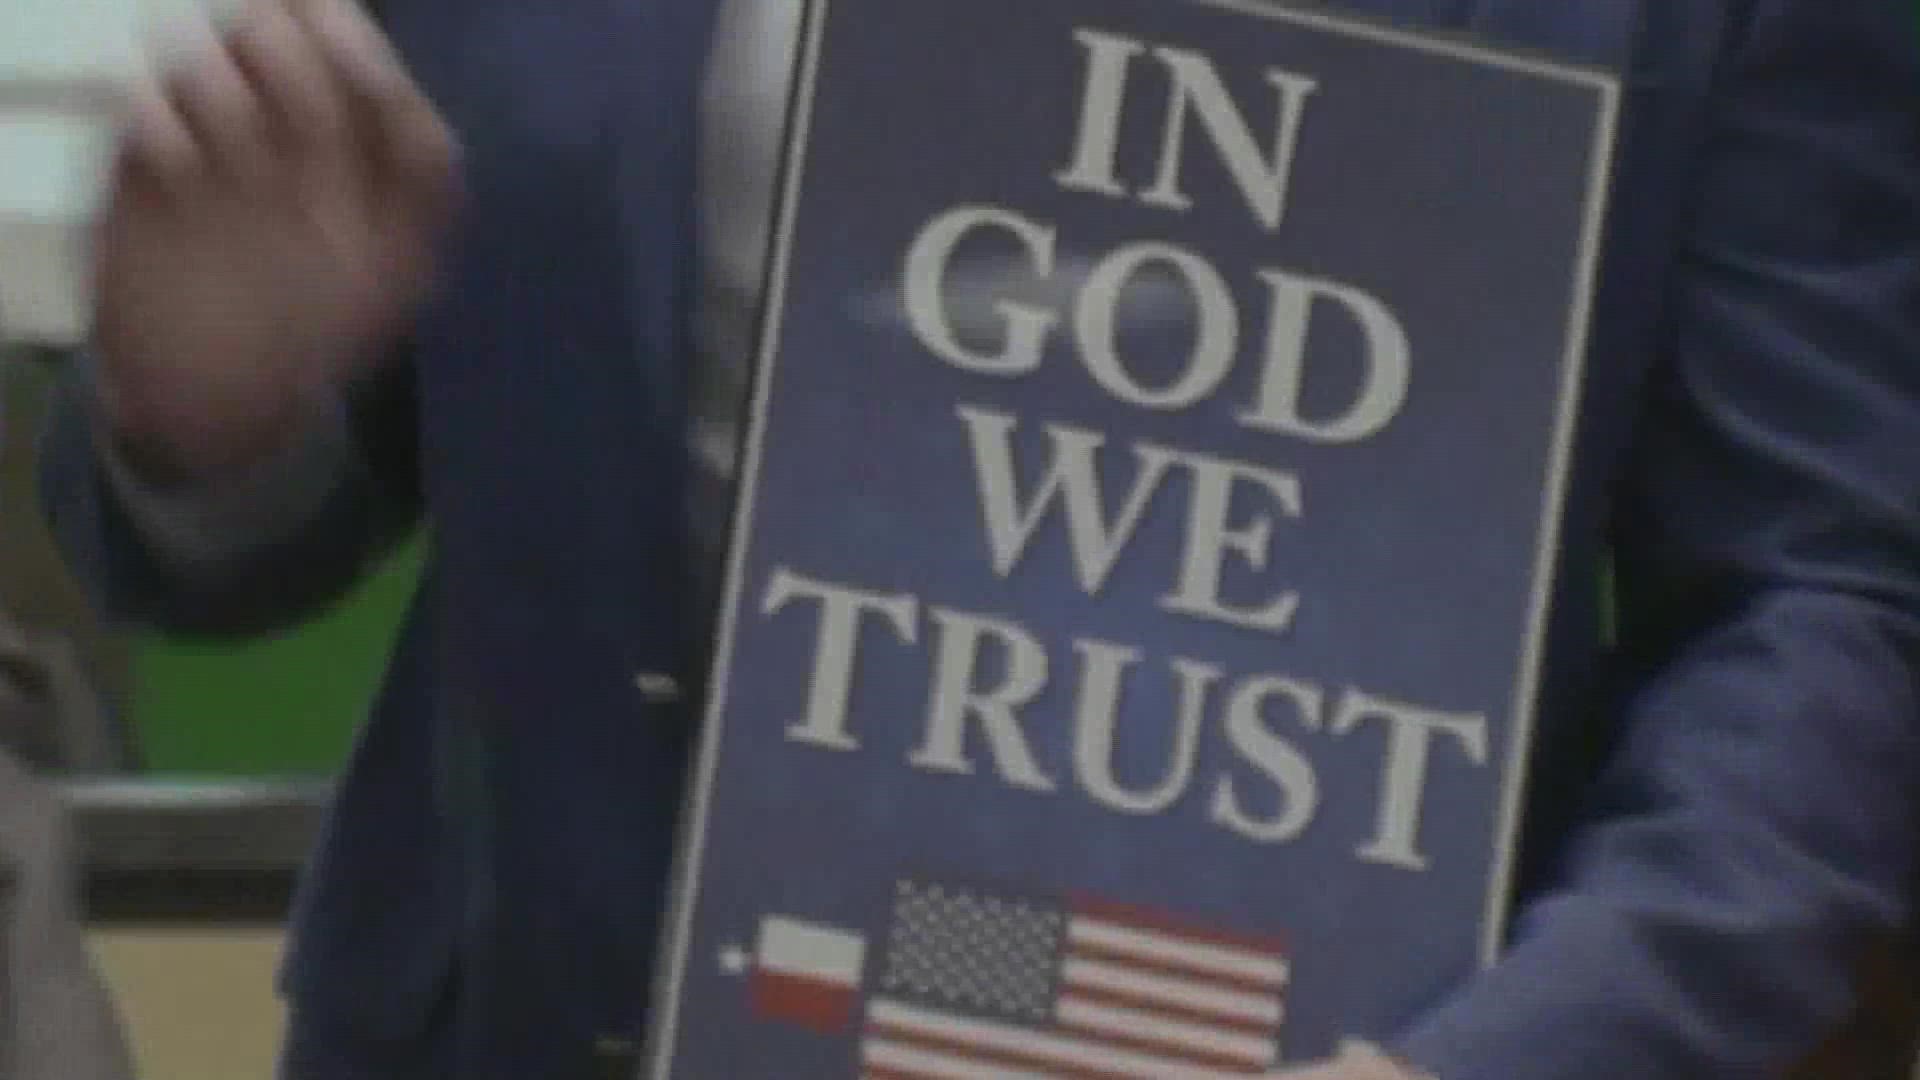 Chaz Stevens, who advocates for the separation of church and state, told WFAA he designed the signs, which are in different languages. He sent 20 to Allen ISD.